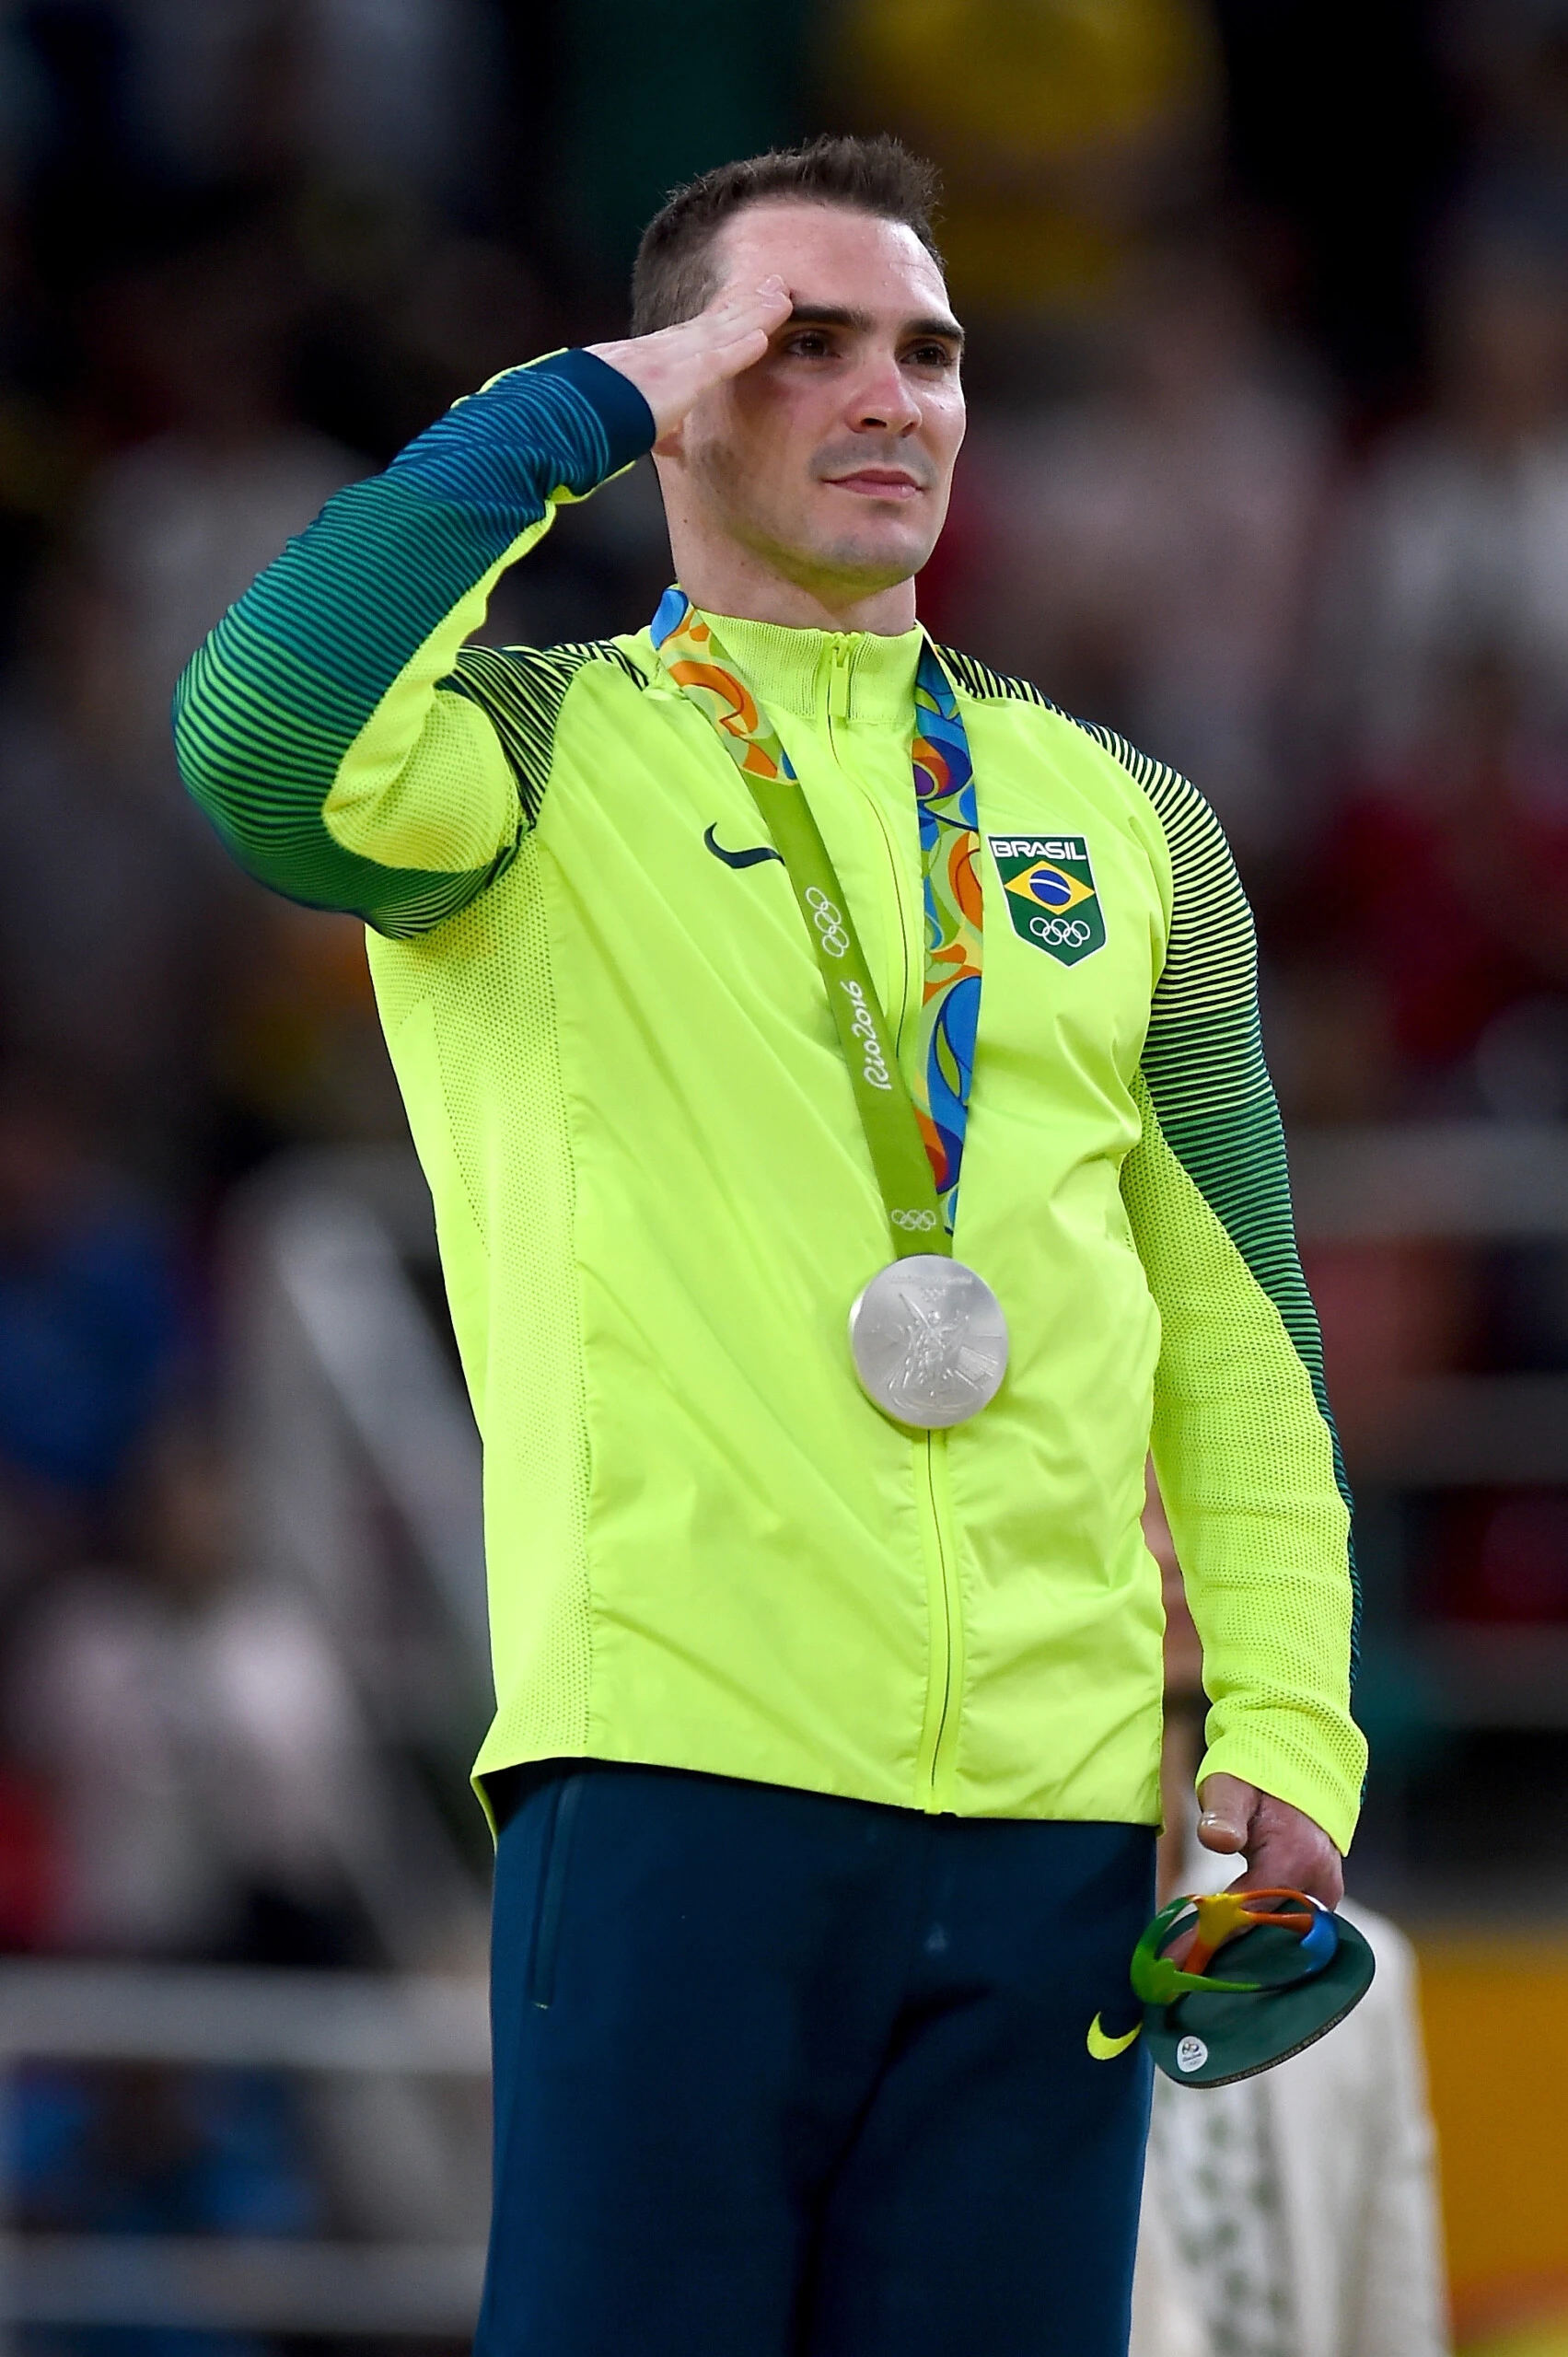 RIO DE JANEIRO, BRAZIL - AUGUST 15:  Silver medalist Arthur Zanetti of Brazil salutes during the national anthem on the podium at the medal ceremony for Men's Rings on day 10 of the Rio 2016 Olympic Games at Rio Olympic Arena on August 15, 2016 in Rio de Janeiro, Brazil.  (Photo by Laurence Griffiths/Getty Images)